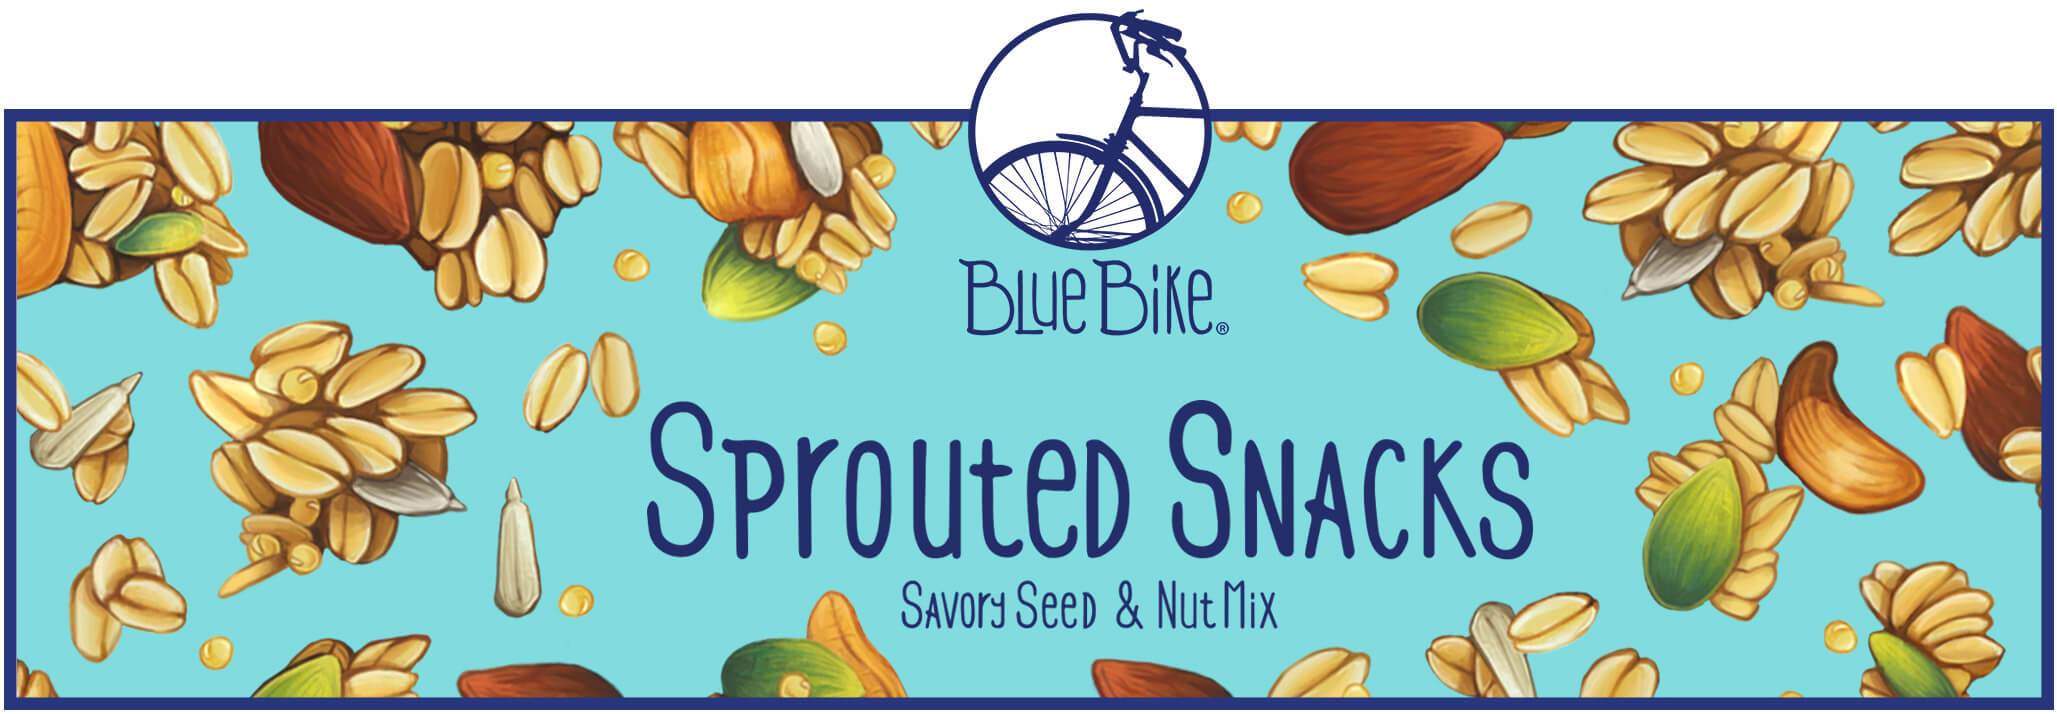 Blue Bike Sprouted Snacks a savory seed and nut mix